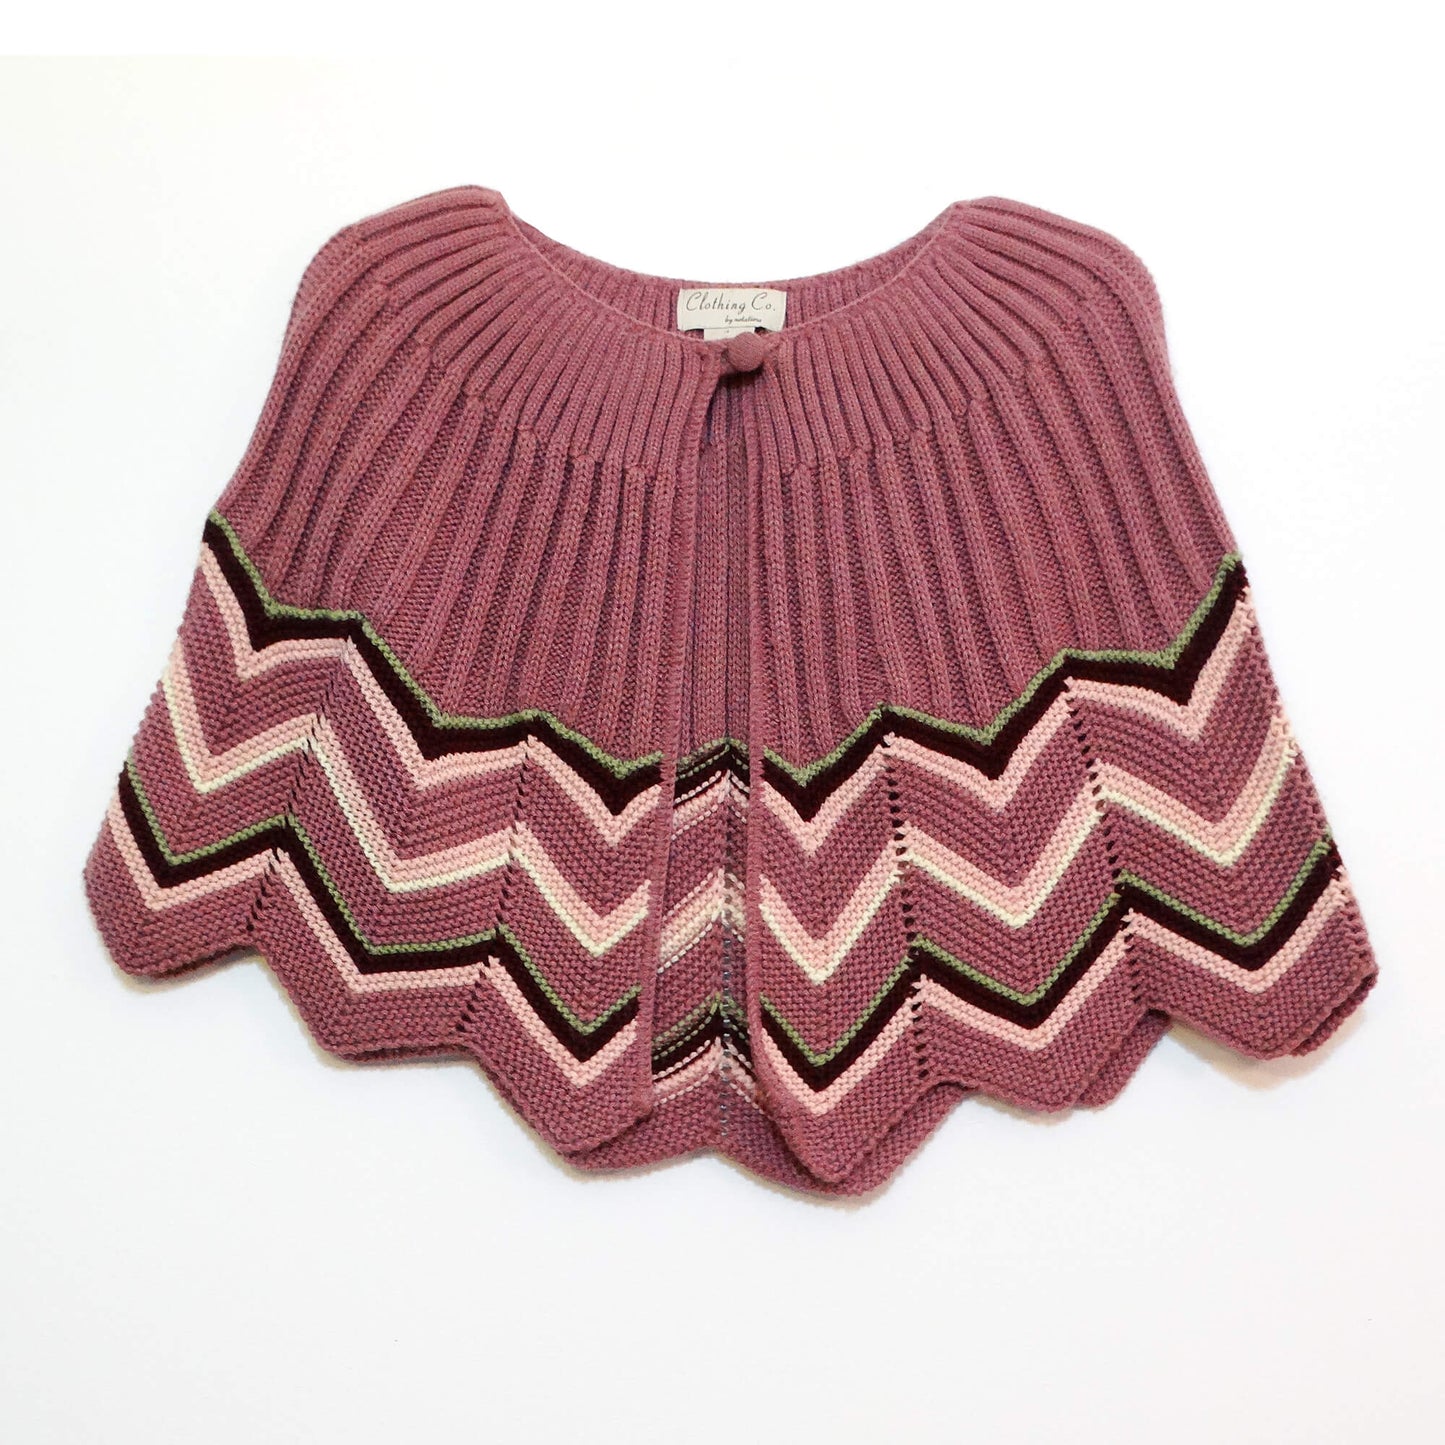 Clothing-Co-by-Notations-Vintage-Chevron-Cape.